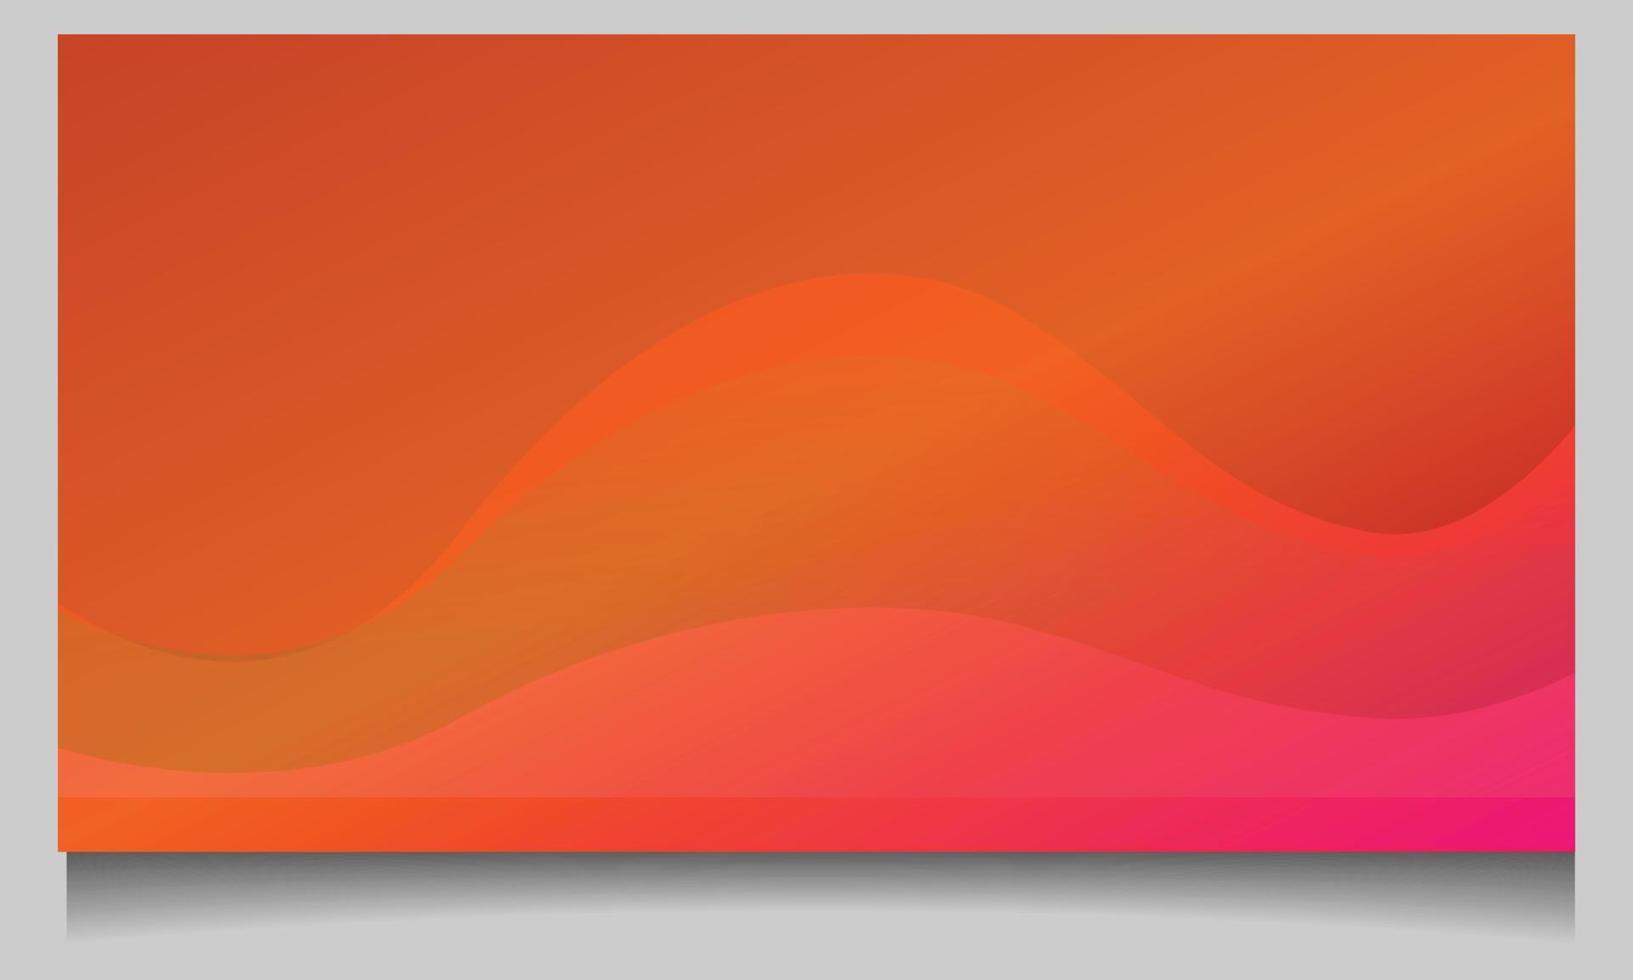 abstract line wave banner vector background illustration